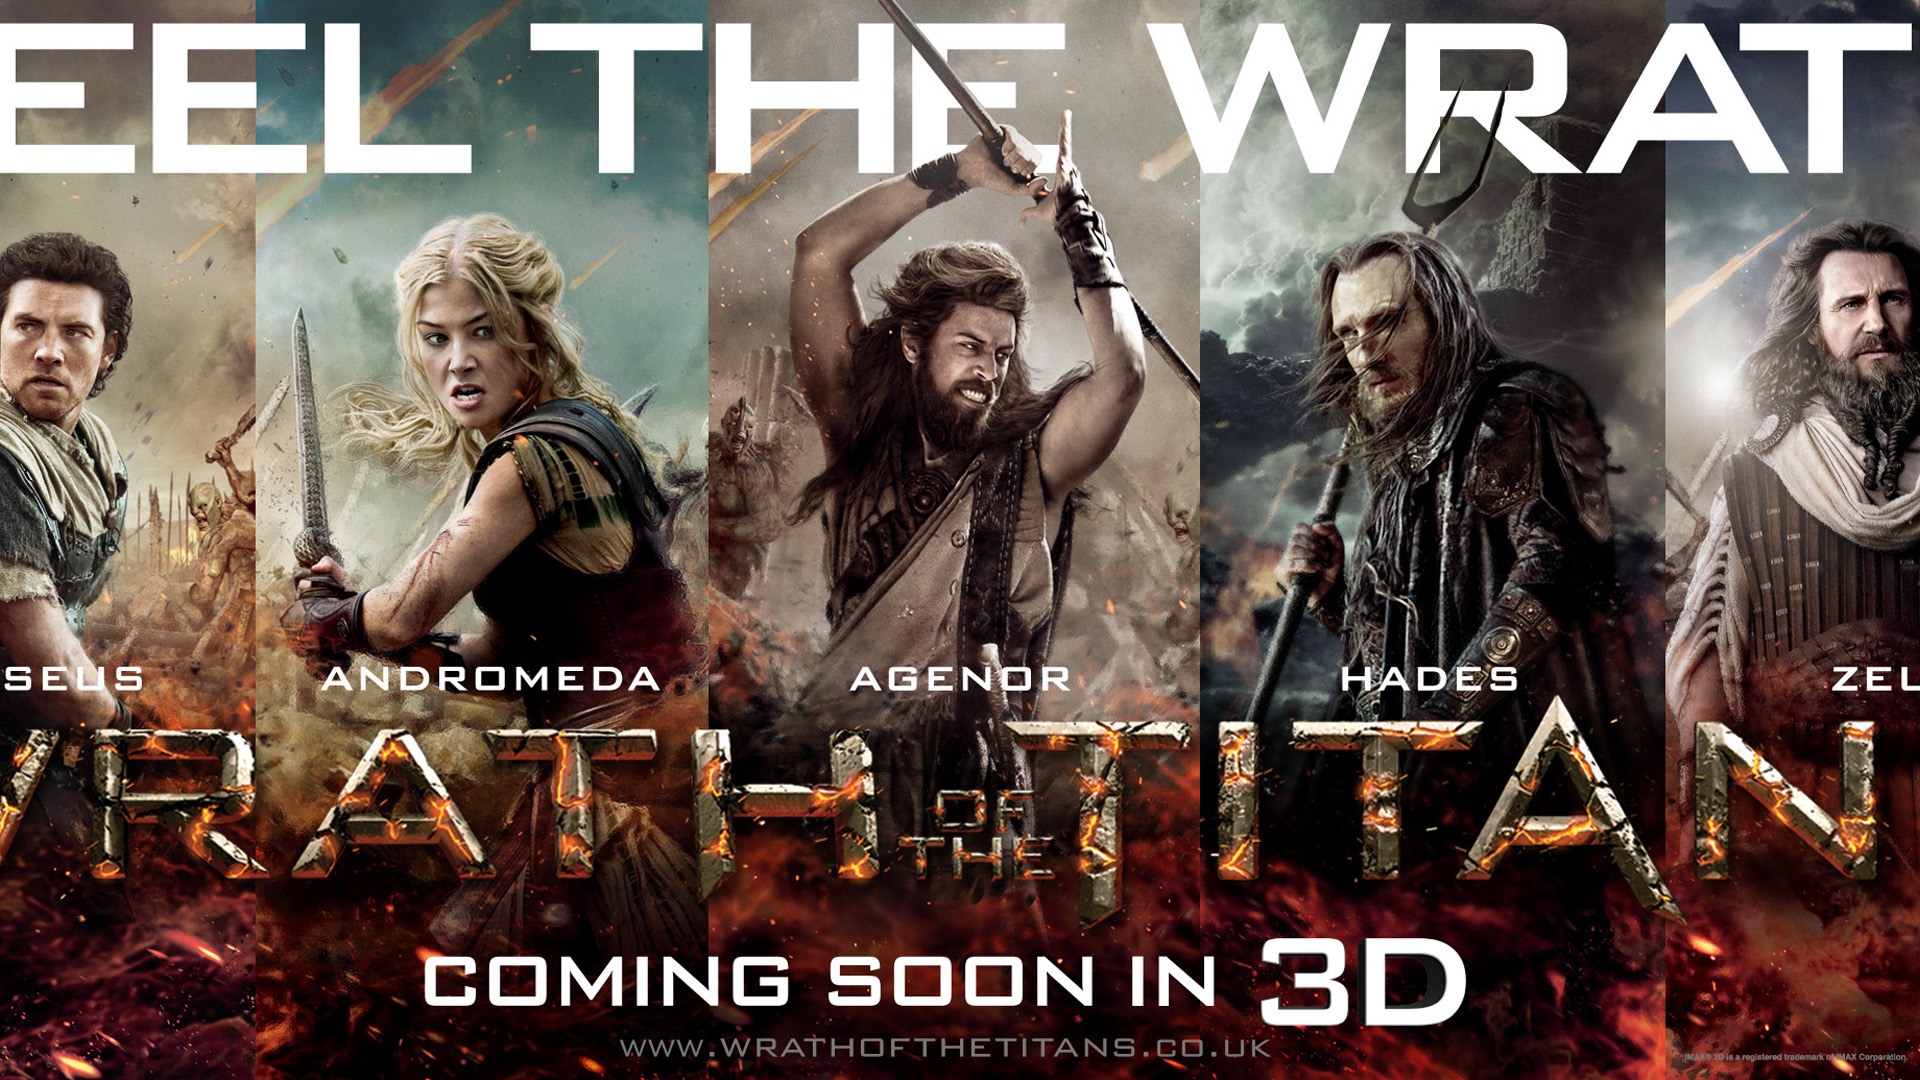 Wrath of the Titans HD Wallpapers #3 - 1920x1080